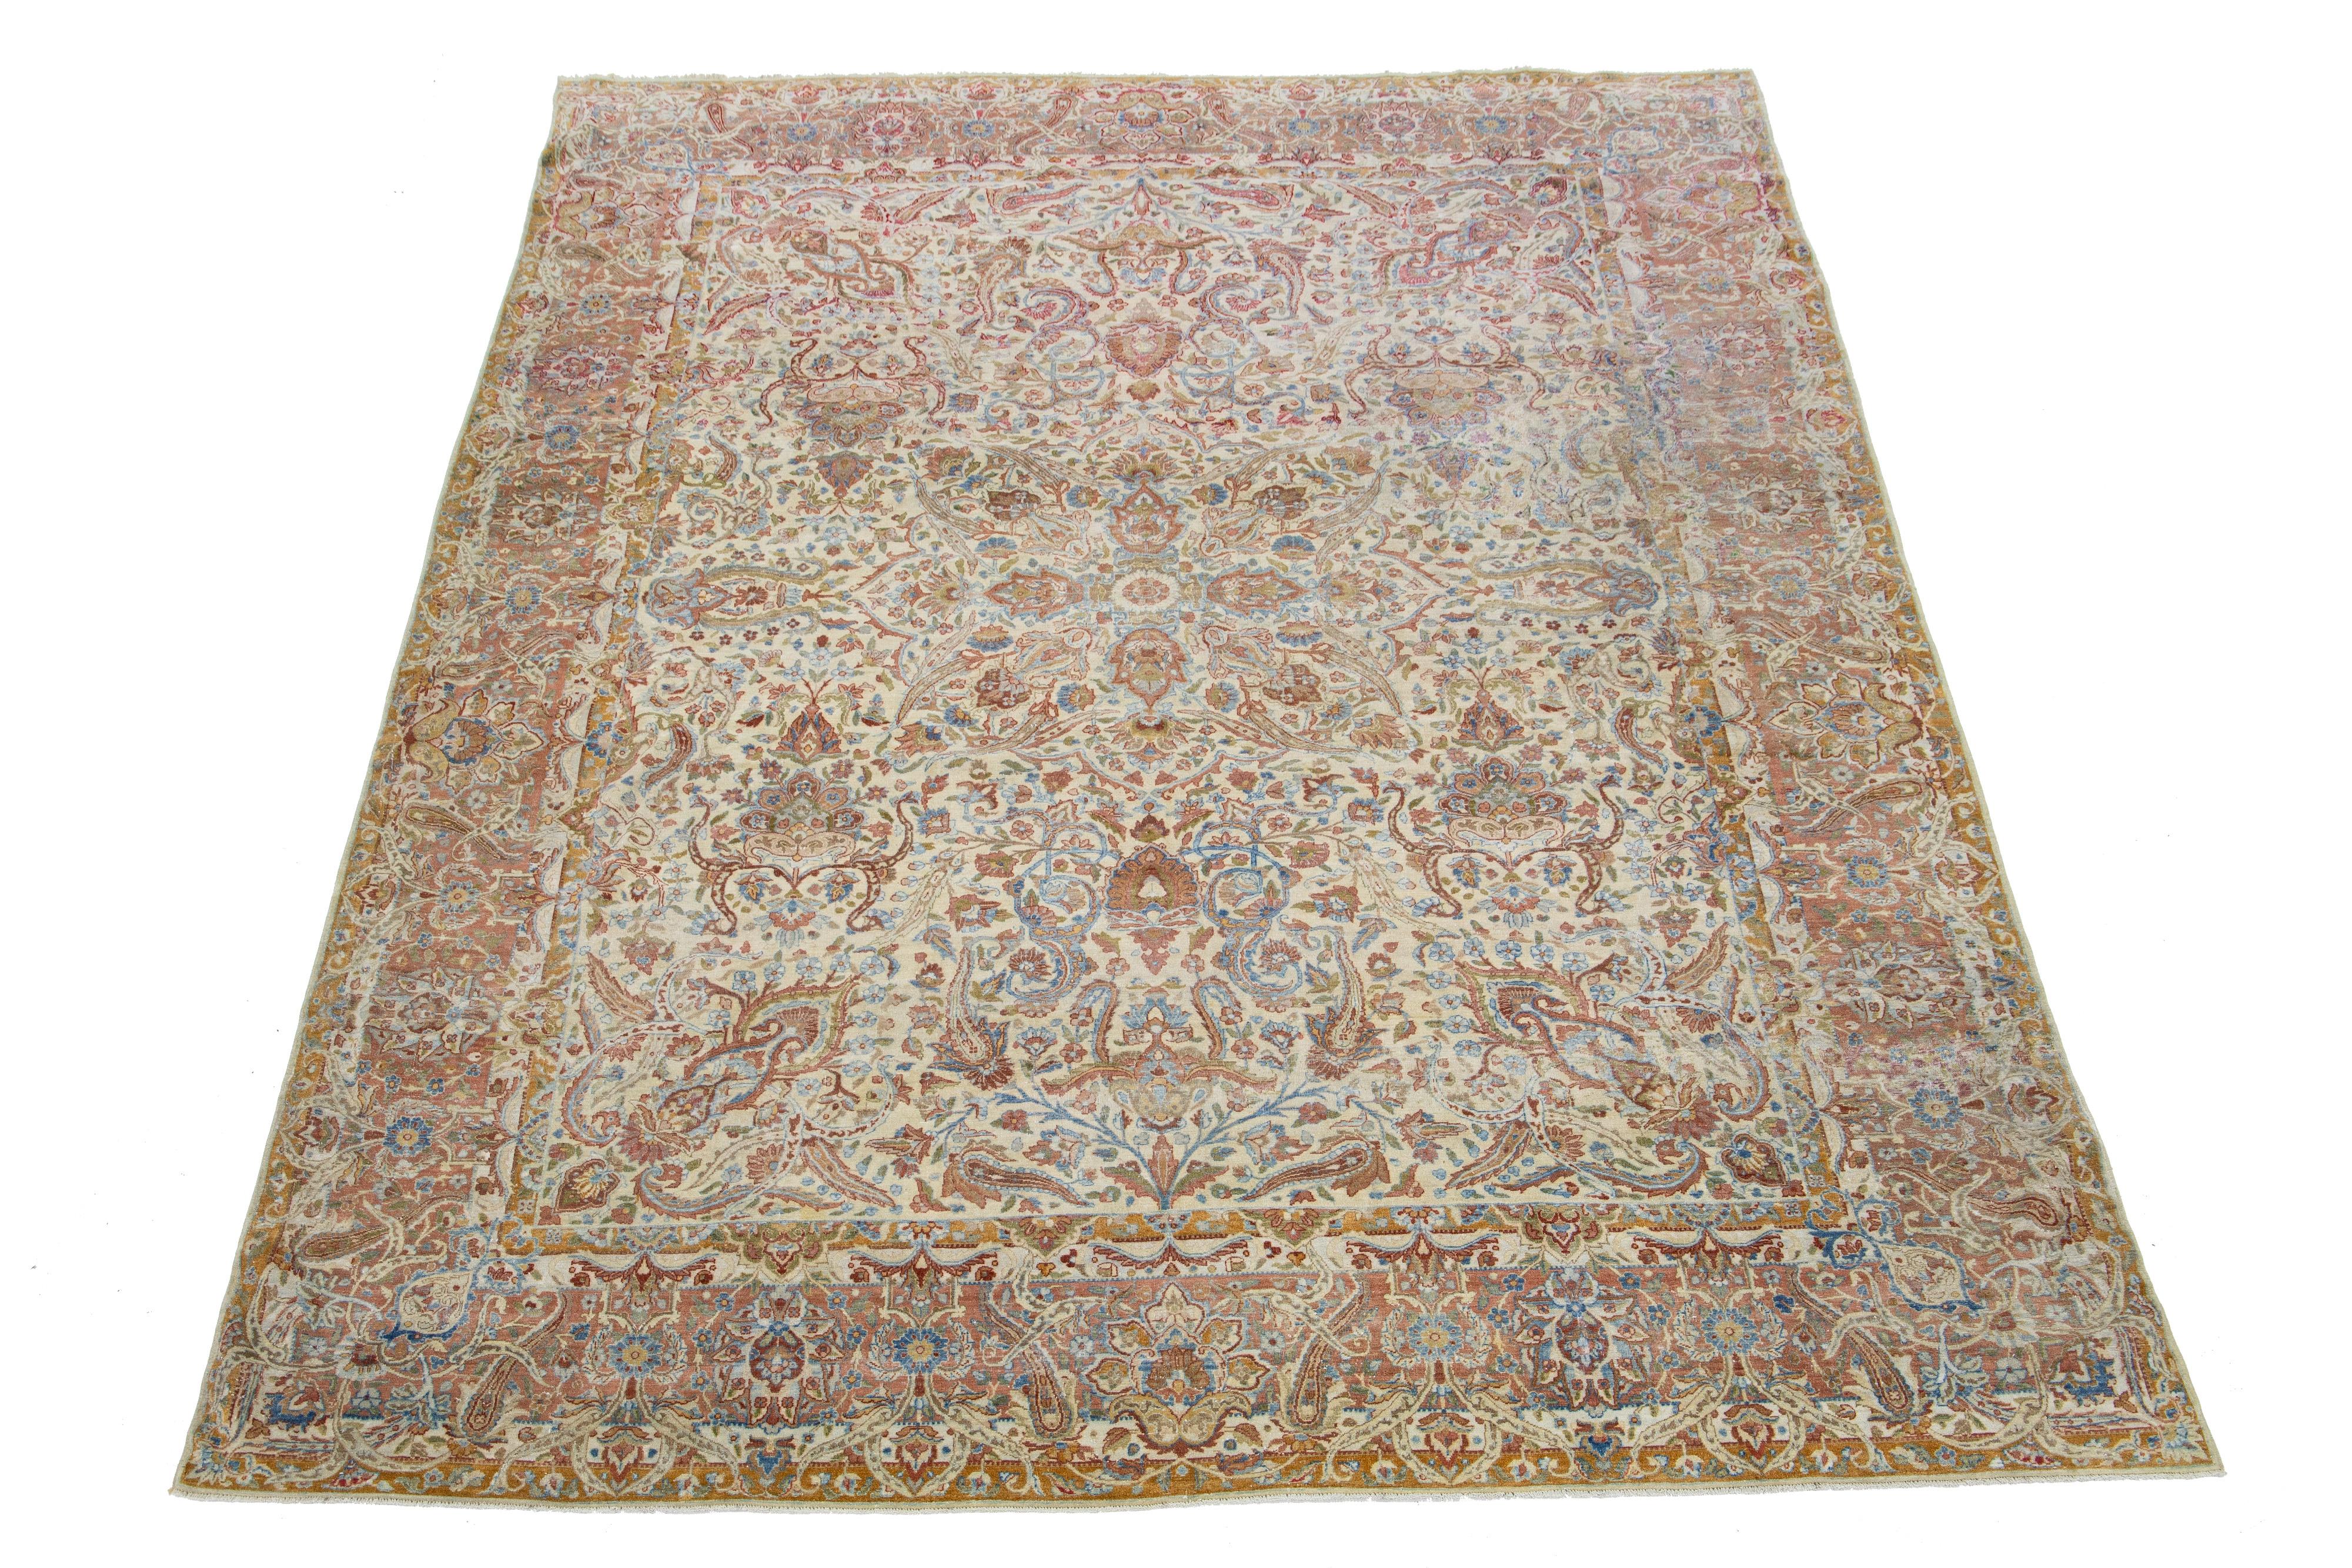 This exquisite, hand-knotted wool rug from Kerman boasts a charming antique finish. The rug's warm beige-tan color field is adorned with a stunning, all-over floral pattern, highlighted by hints of rich blue and rust—a remarkable piece of Persian